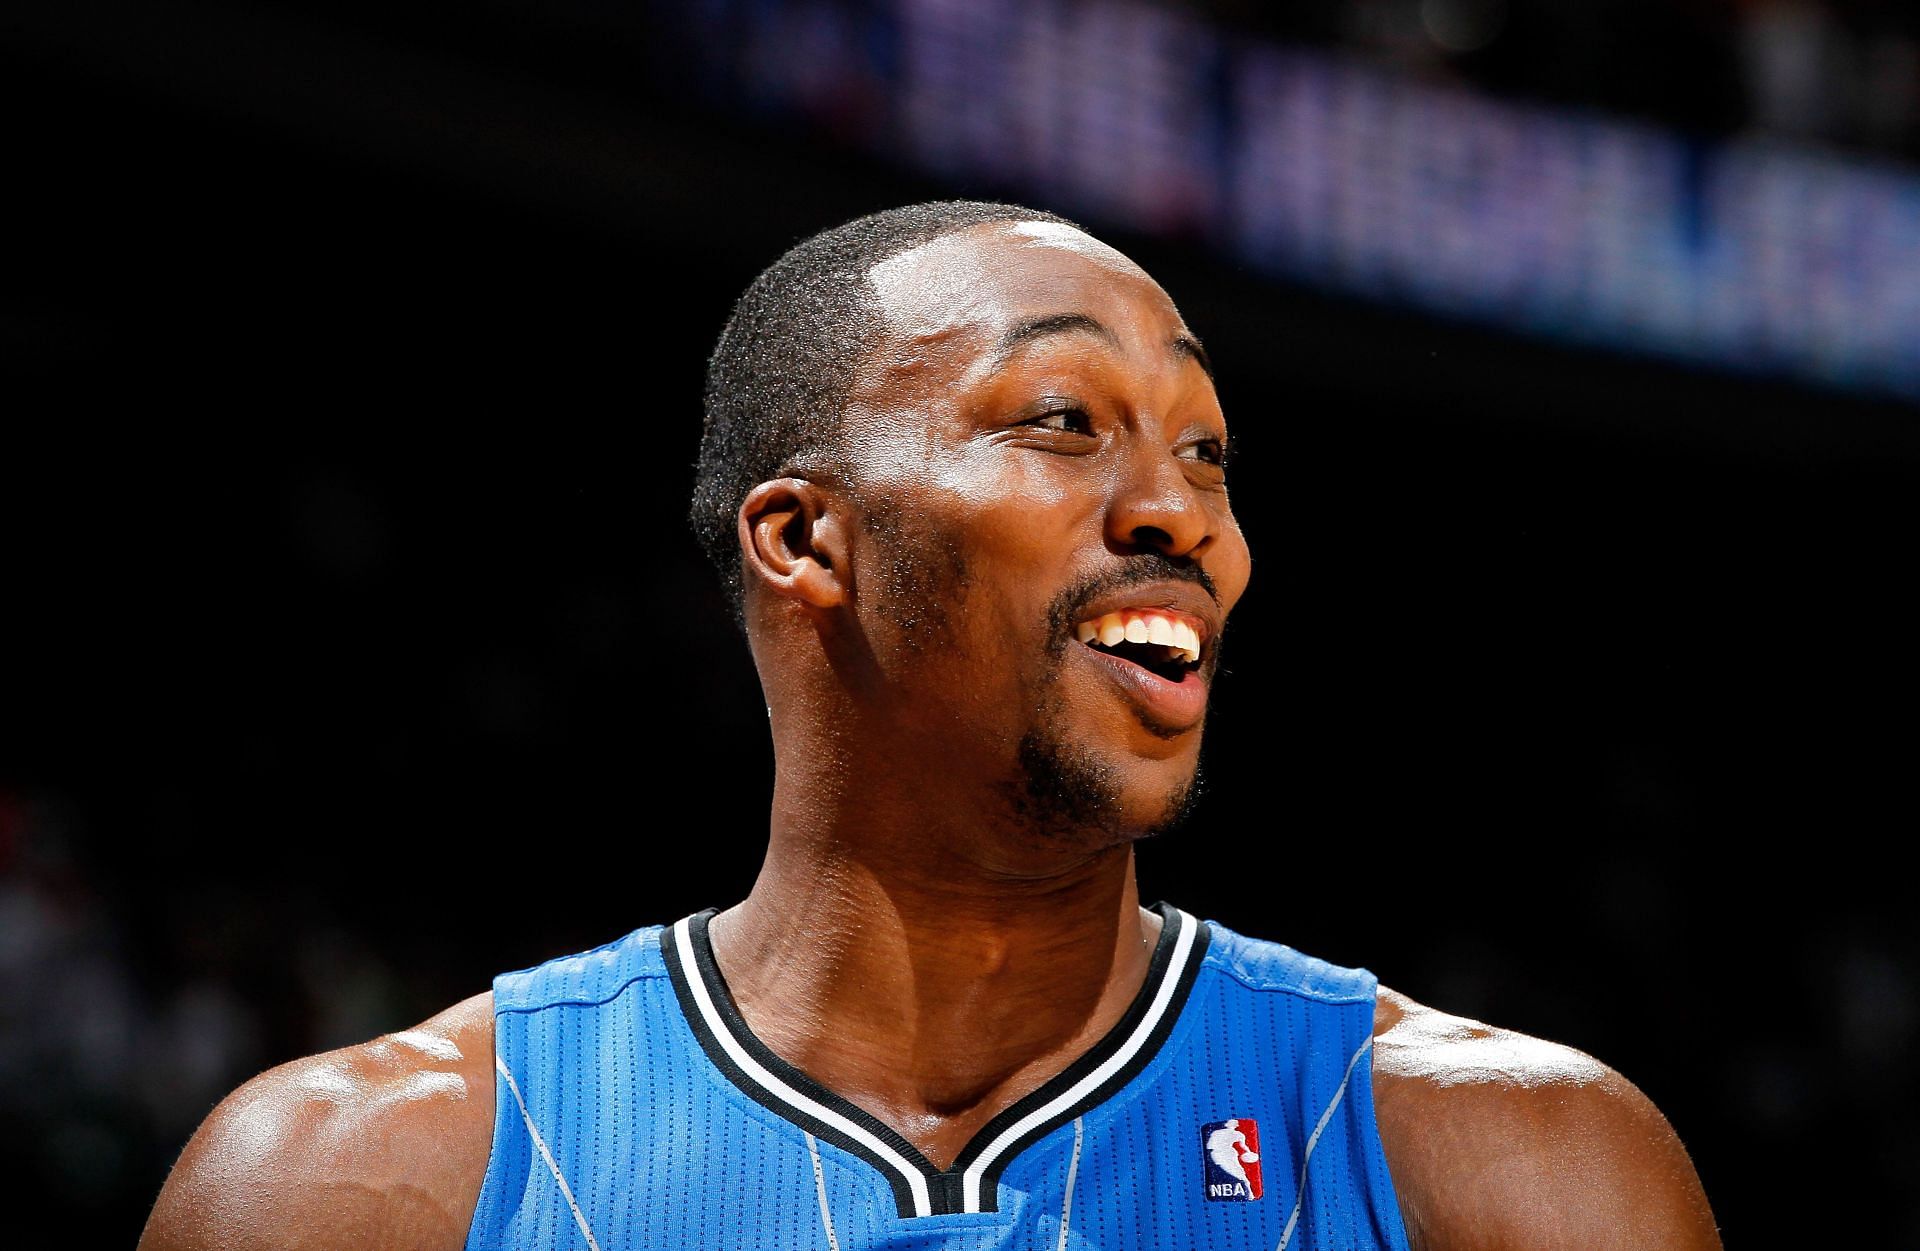 Dwight Howard #12 of the Orlando Magic against the Atlanta Hawks during Game Three of the Eastern Conference Quarterfinals in the 2011 NBA Playoffs at Philips Arena on April 22, 2011 in Atlanta, Georgia.